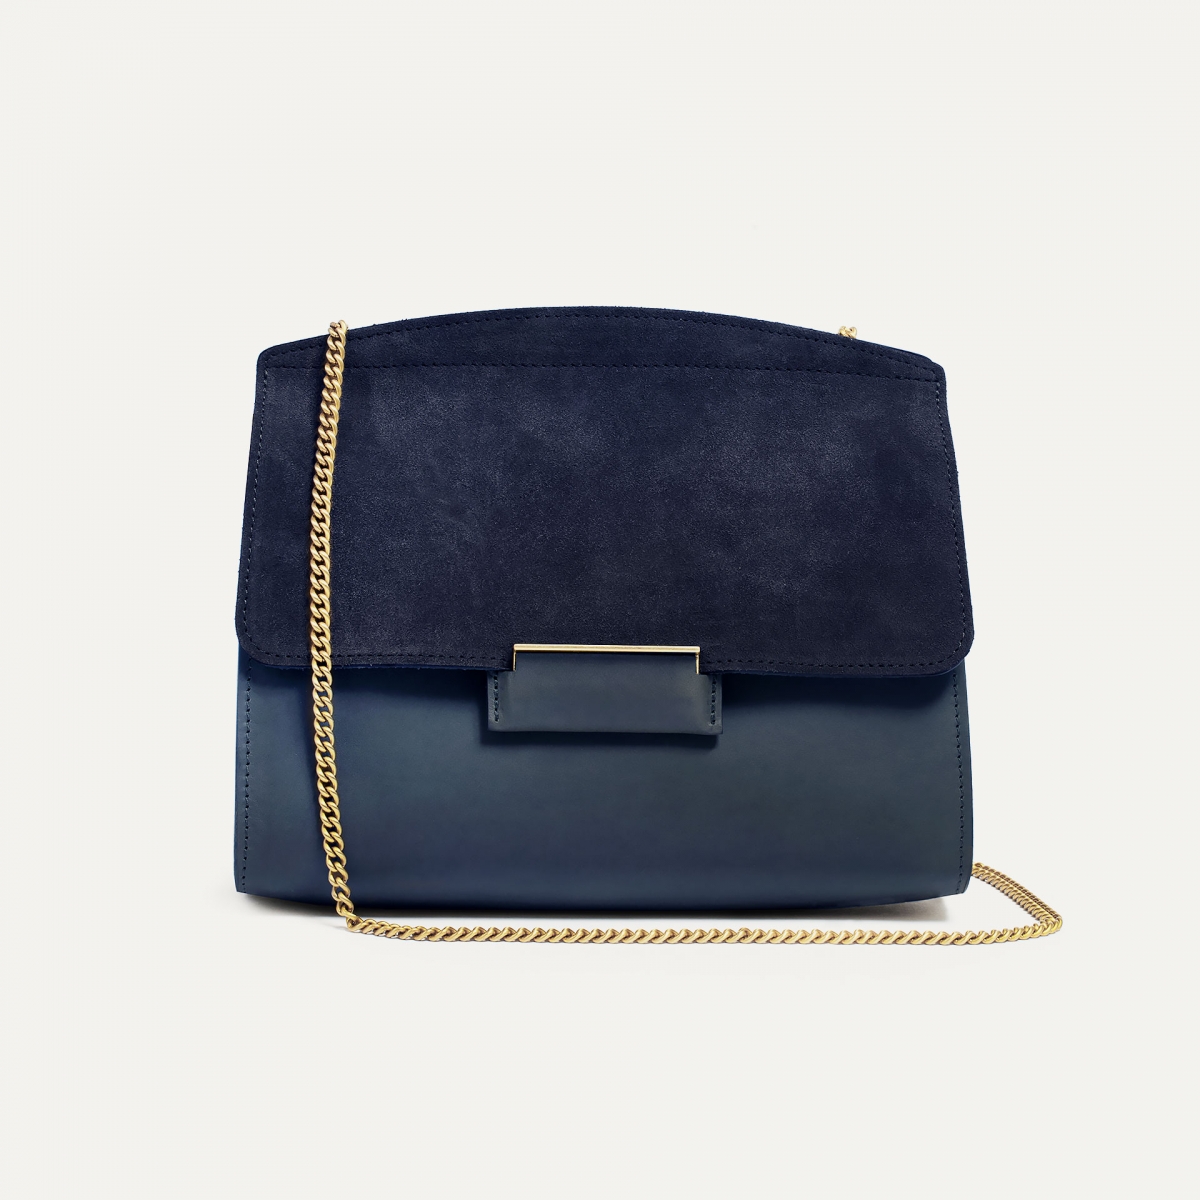 Origami S clutch bag - Navy Blue / MIx (image n°1)